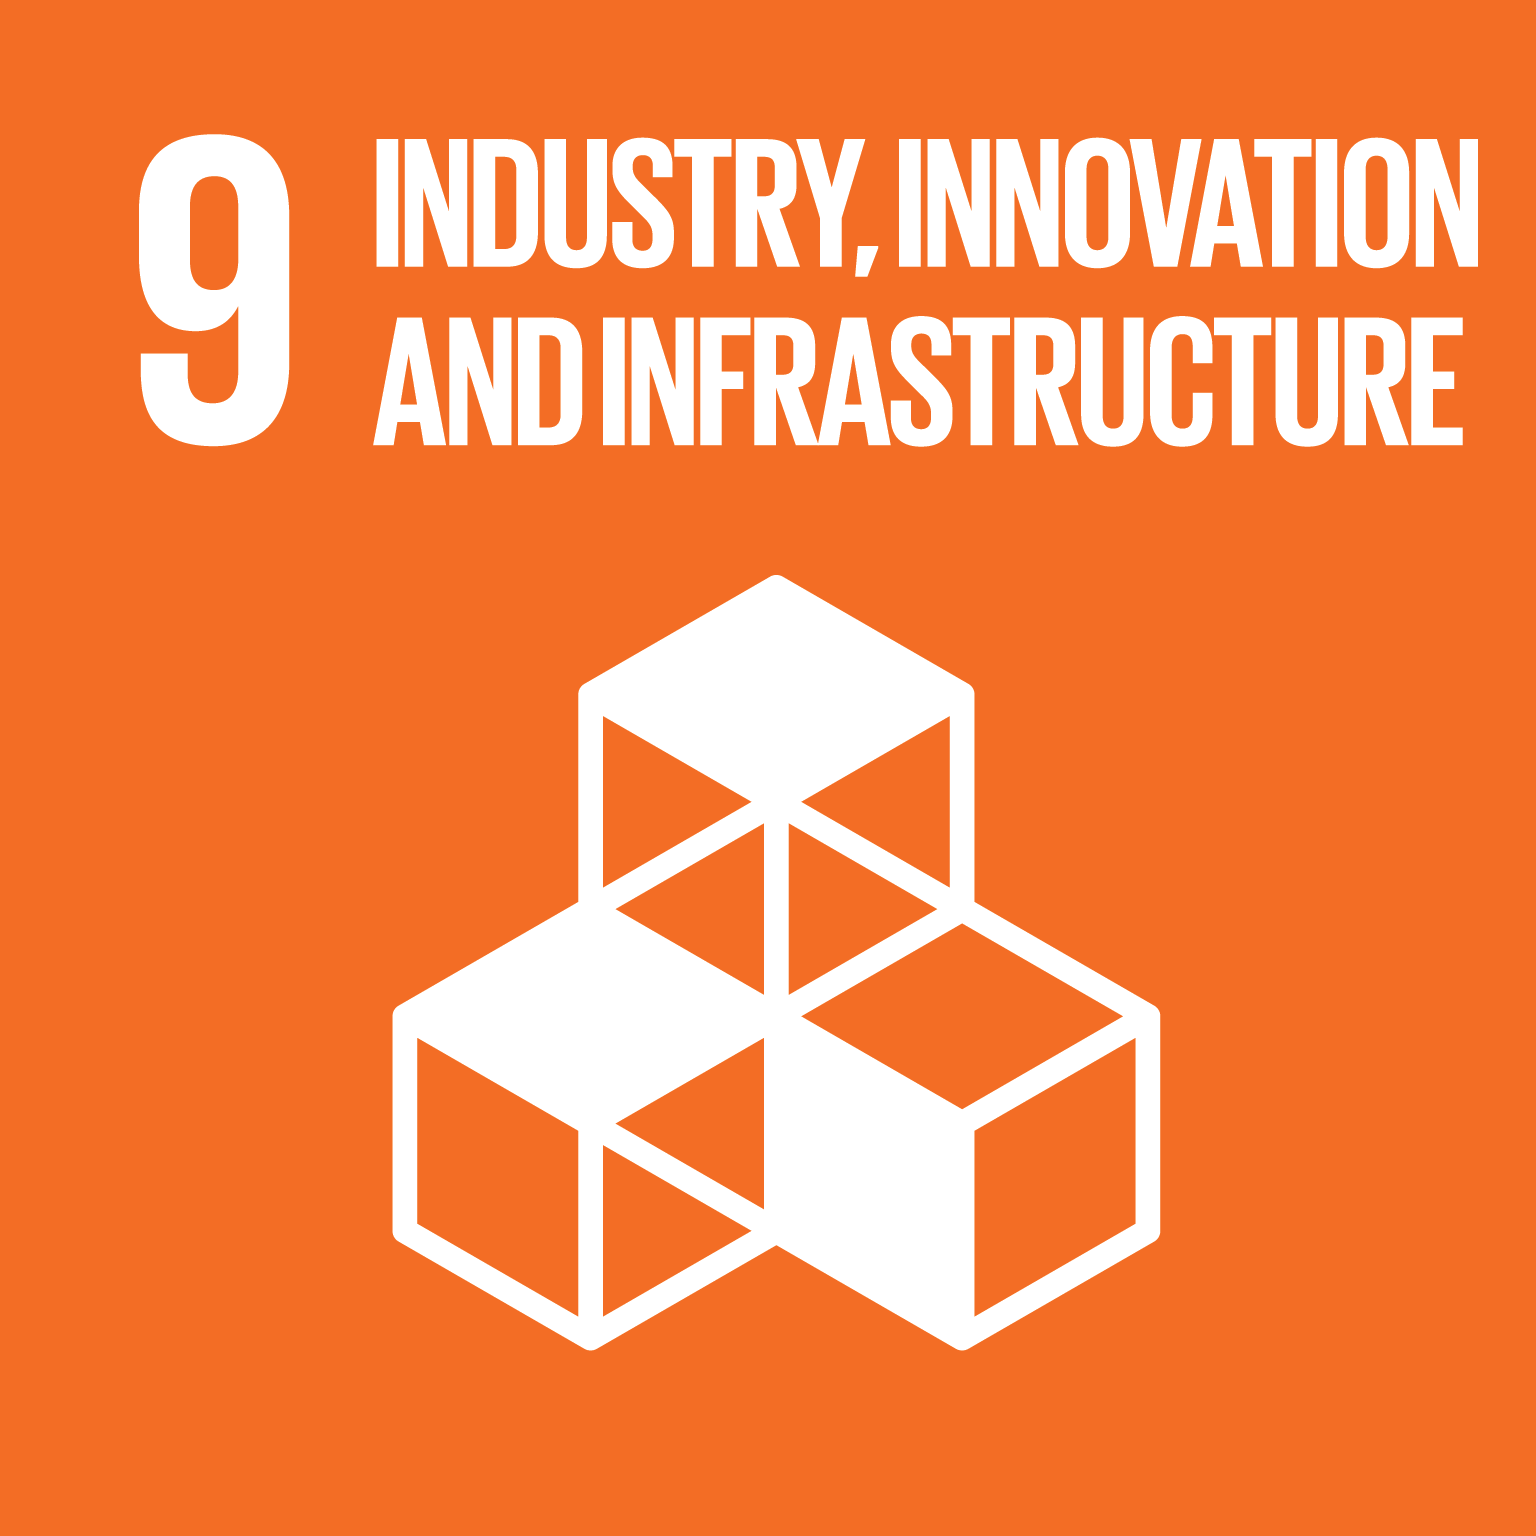 9 - industry, innovation and infrastructure